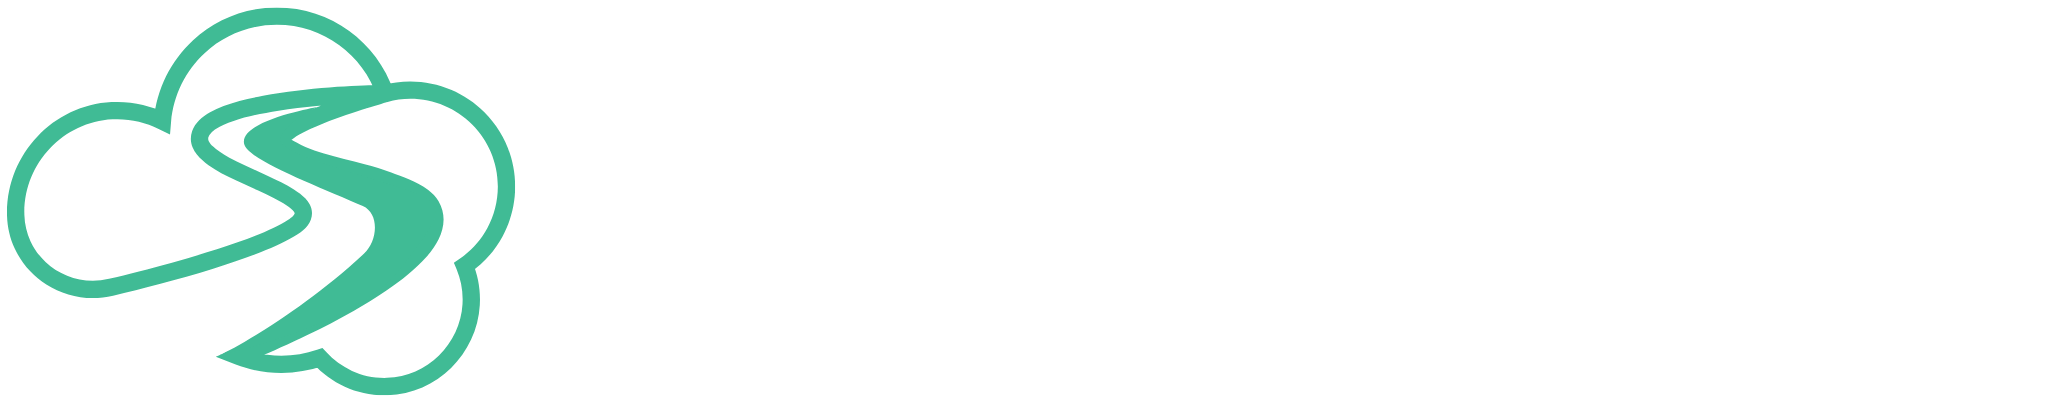 East River View Software Company